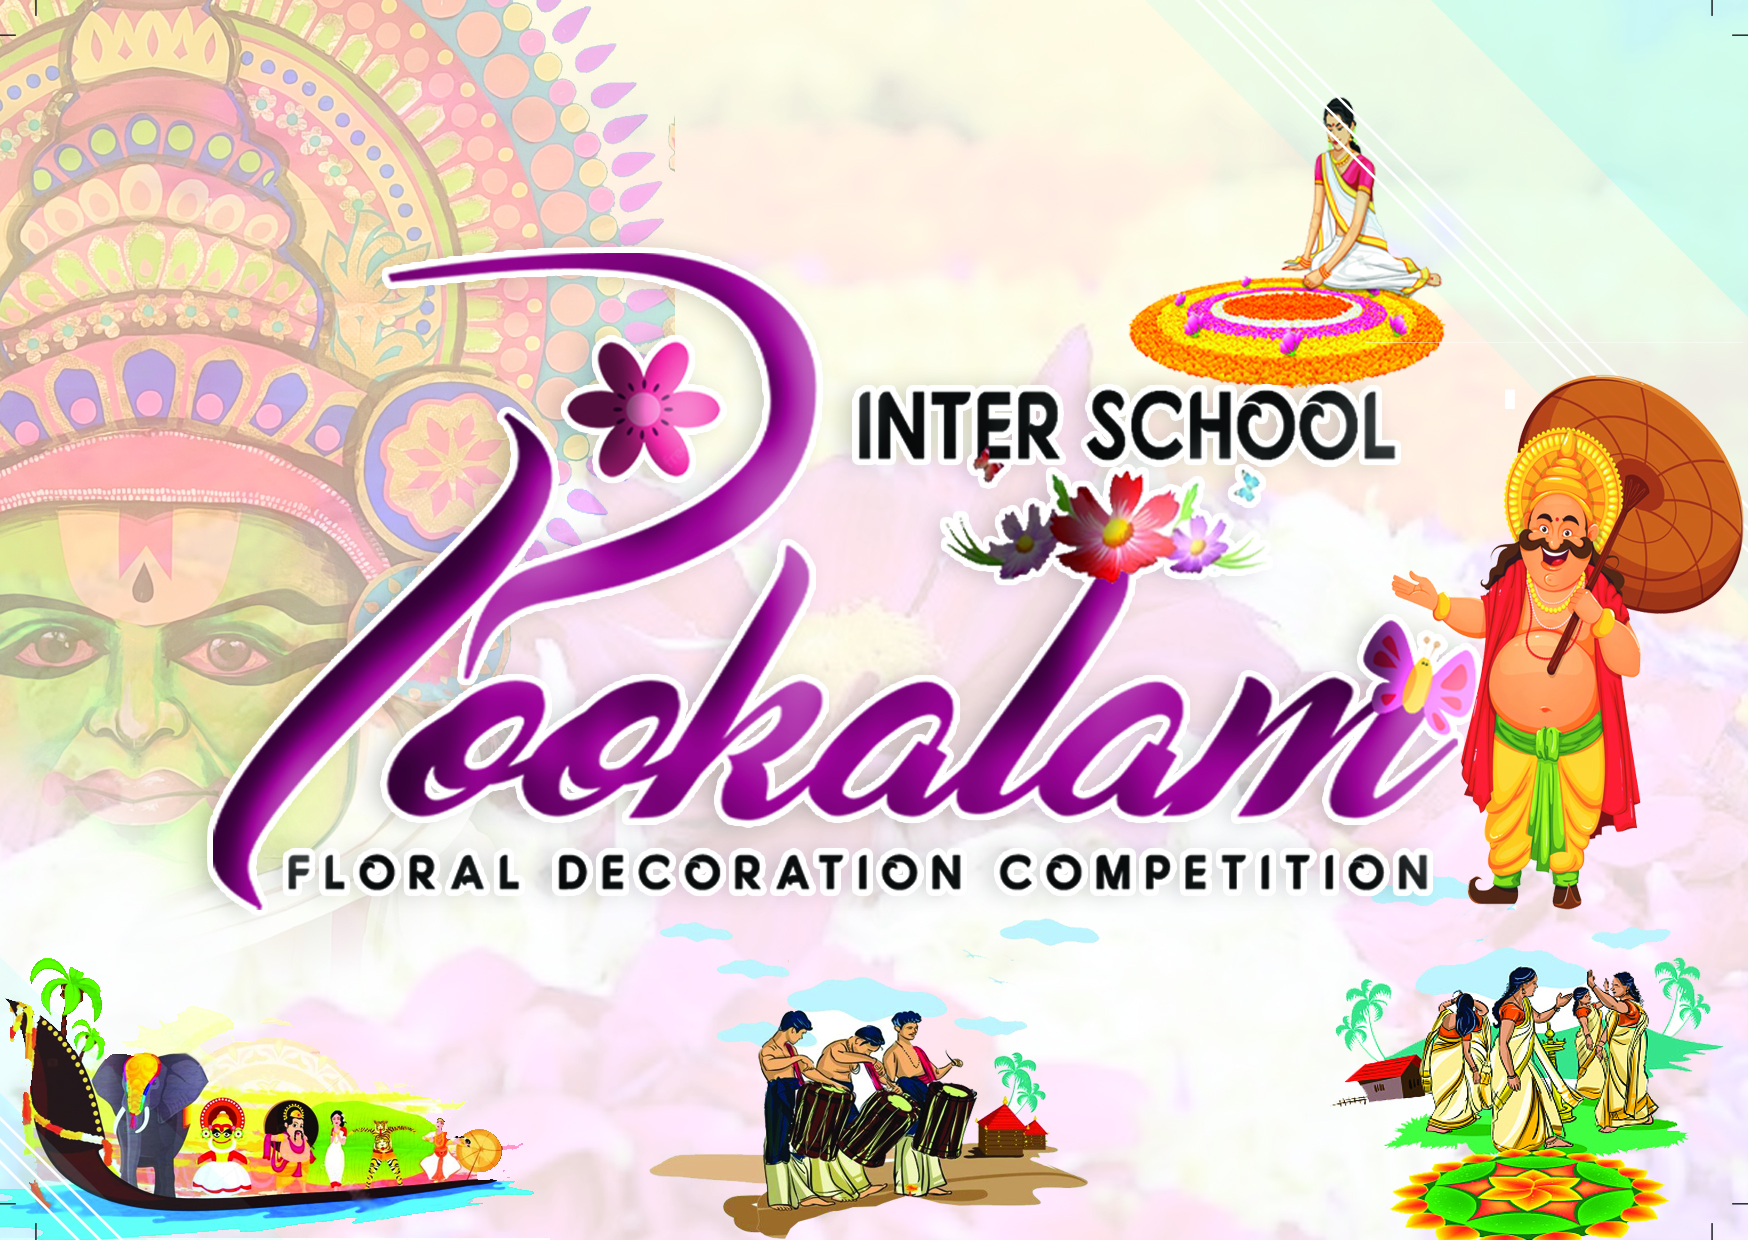 INTER SCHOOL FLORAL DECORATION COMPETITION (POOKALAM)